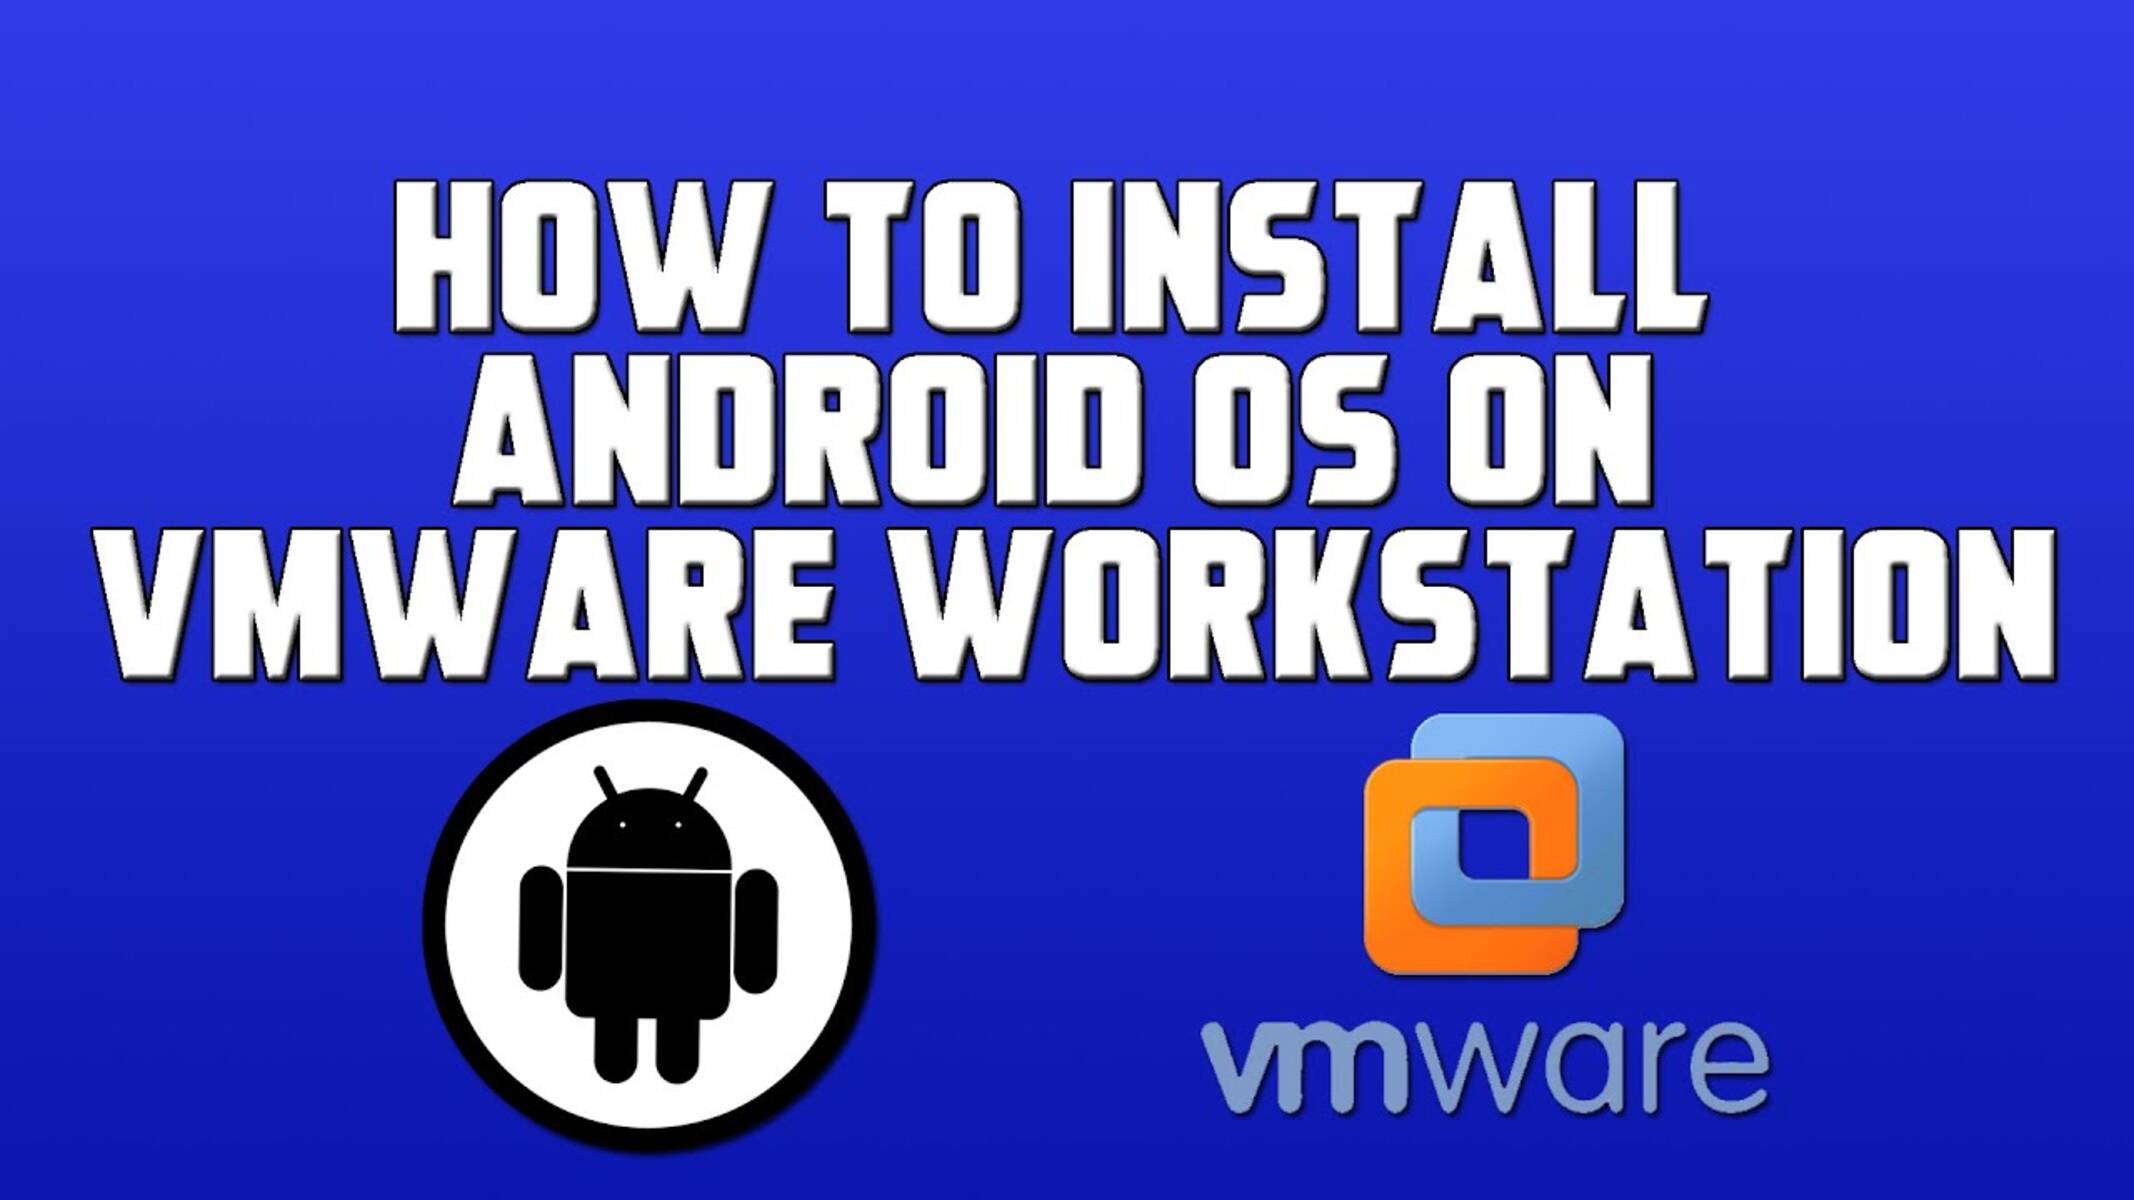 vmware workstation for android download